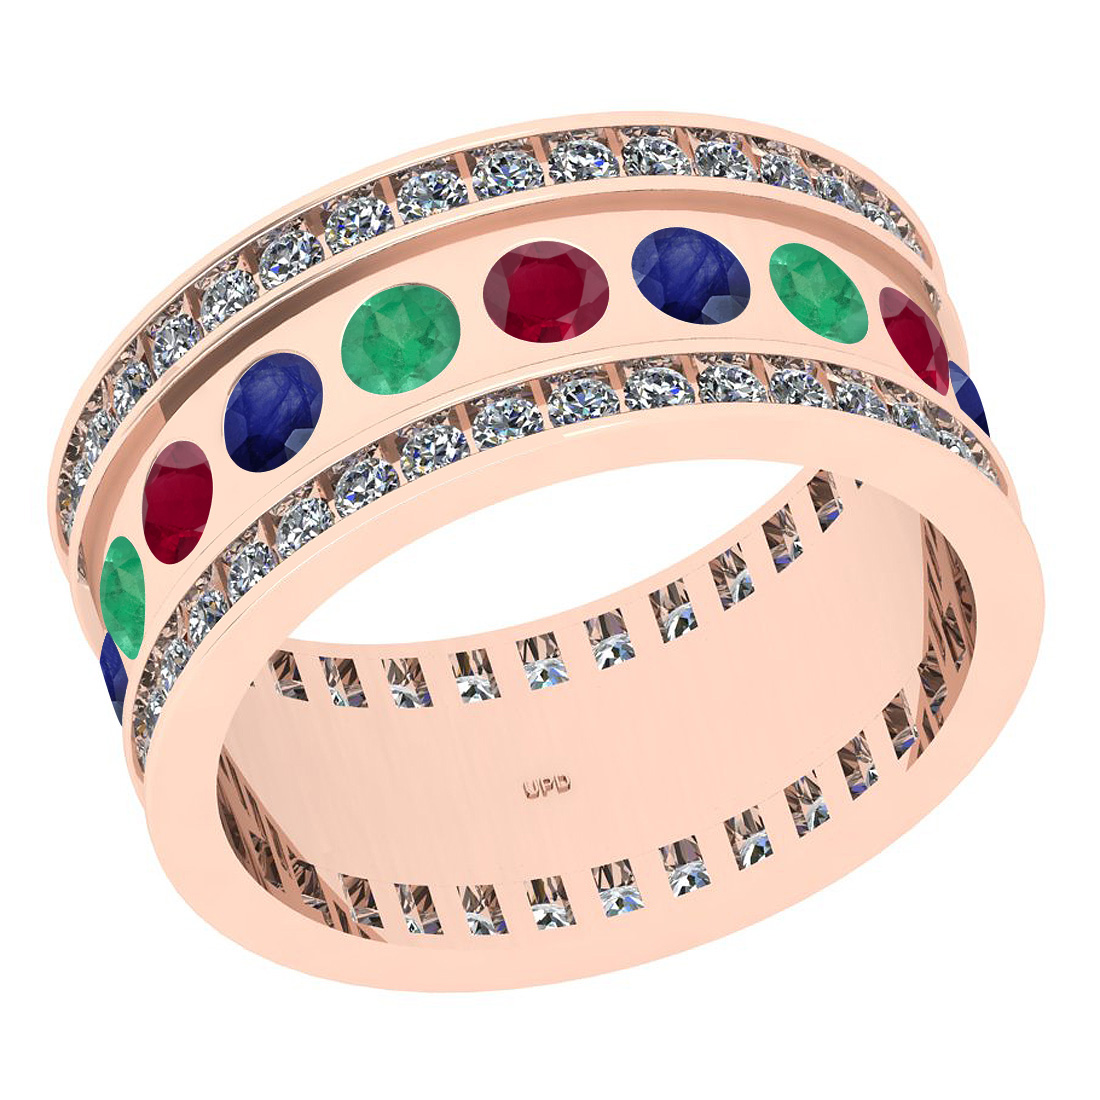 New Arrival  2.22 Ctw I2/I3 Multi Ruby,Emerlad,Blue Sapphire And Diamond 14K Rose Gold Engagement Band Ring at Best Wholesale Price. More Here:- shorturl.at/lILS6 #selfpurchase #jotd #luxurylifestyle #designerjewelry #diamondring #gemstonejewelry #diamondjewelry #lifestyle